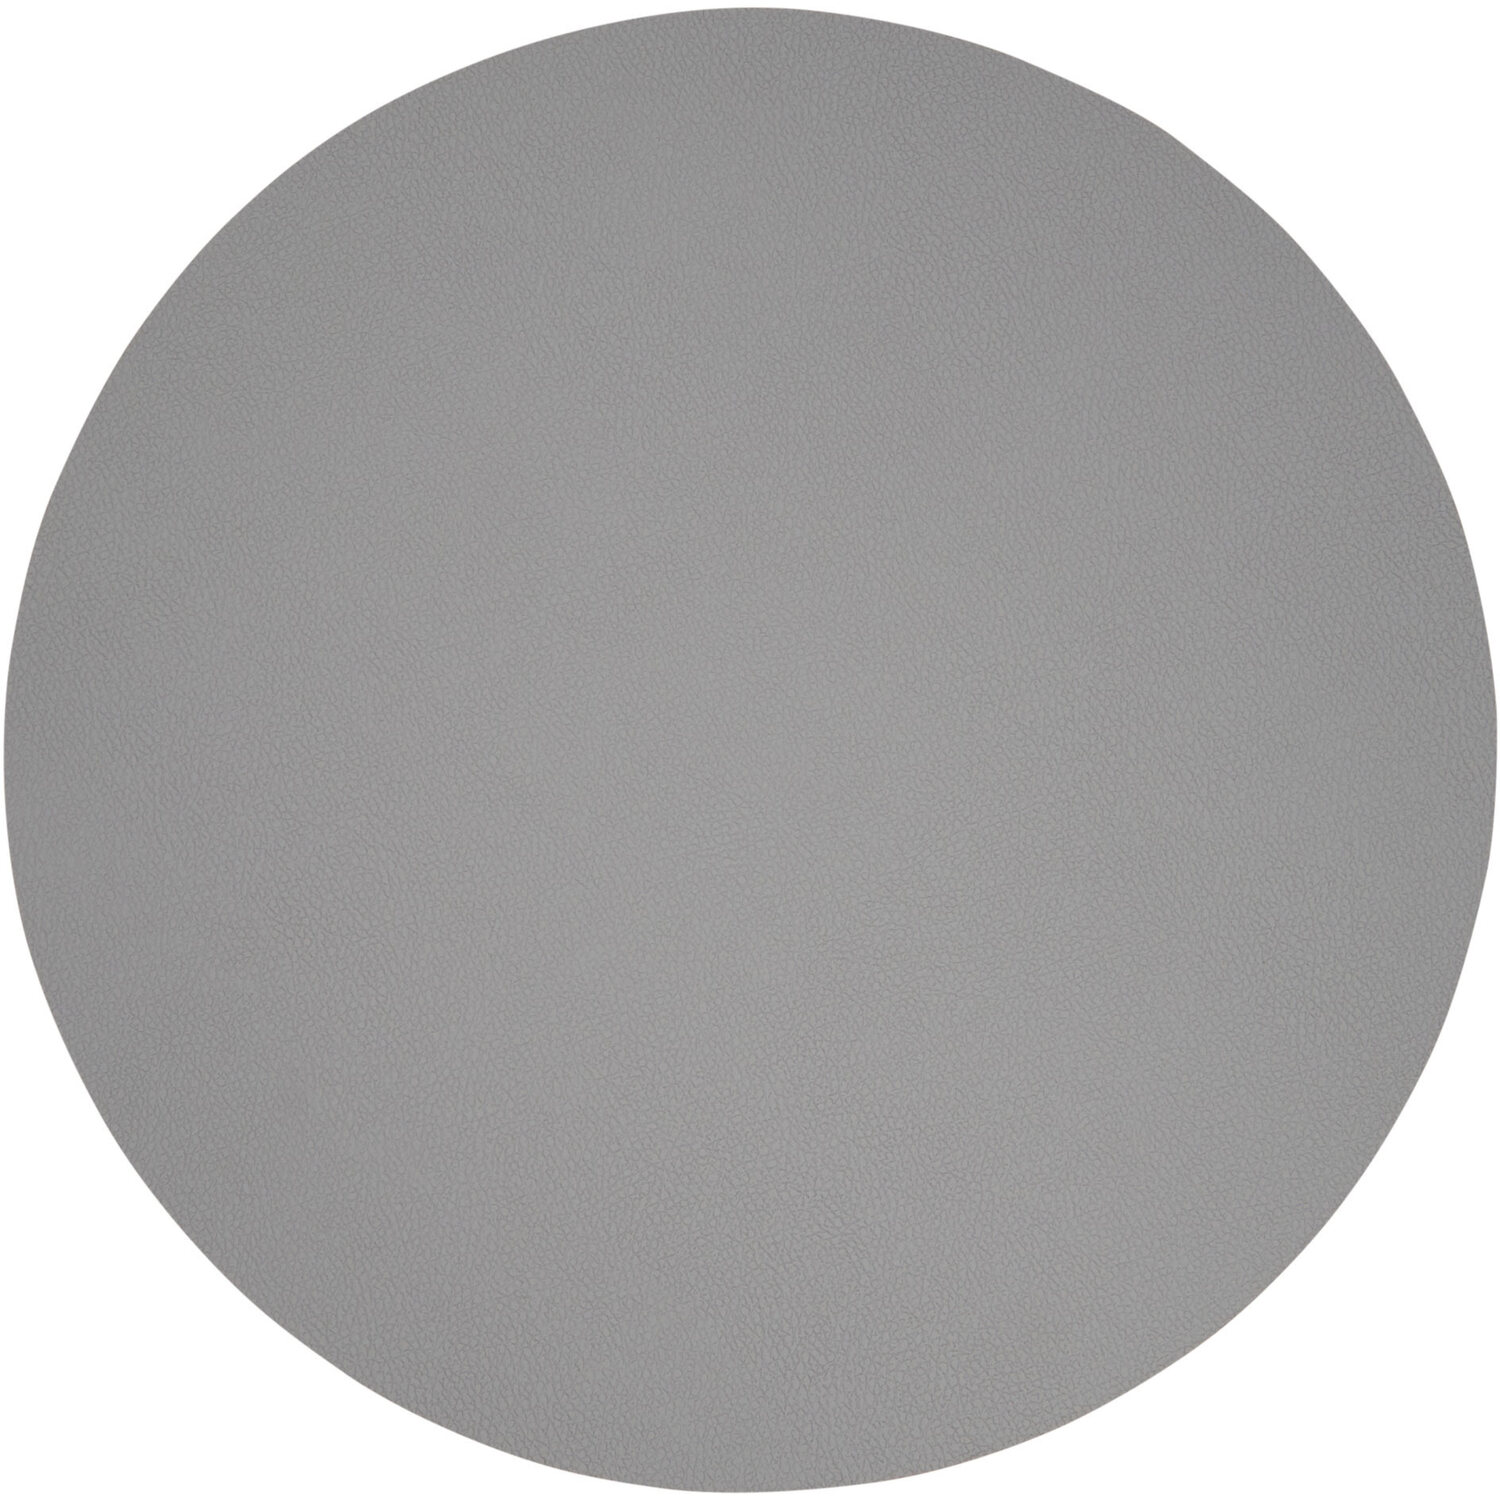 Set of 2 Round Placemats - Grey Image 5